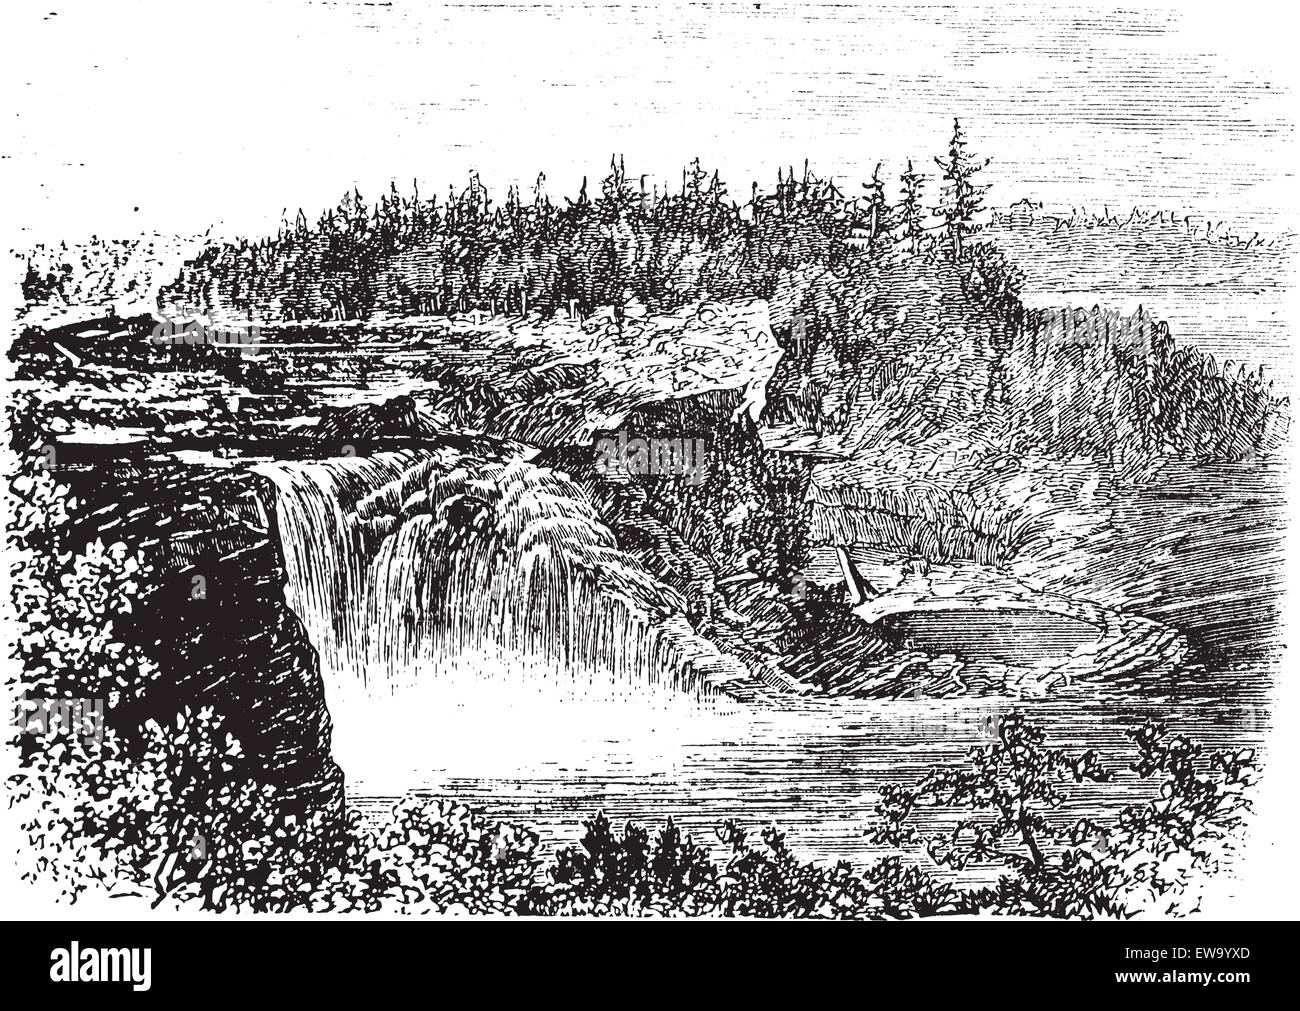 Chaudiere river Falls,in Quebec, Canada vintage engraving, during the 1890s. Old engraved illustration of the Kettle Falls. Stock Vector